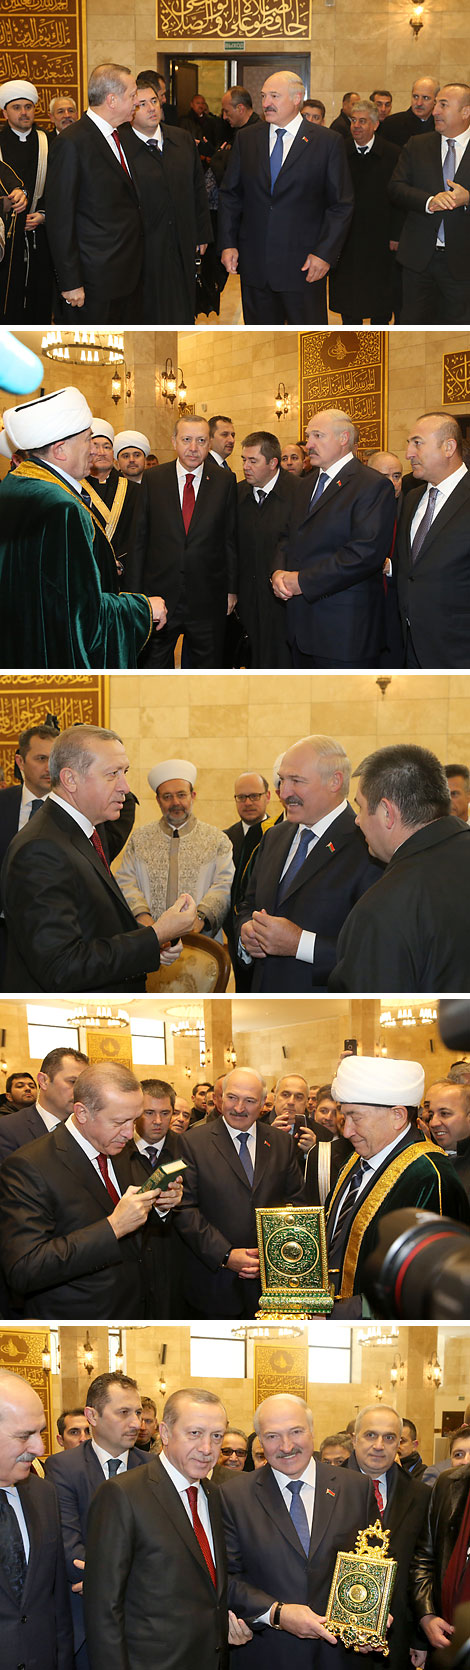 The heads of state attend the Cathedral Mosque opening ceremony in Minsk